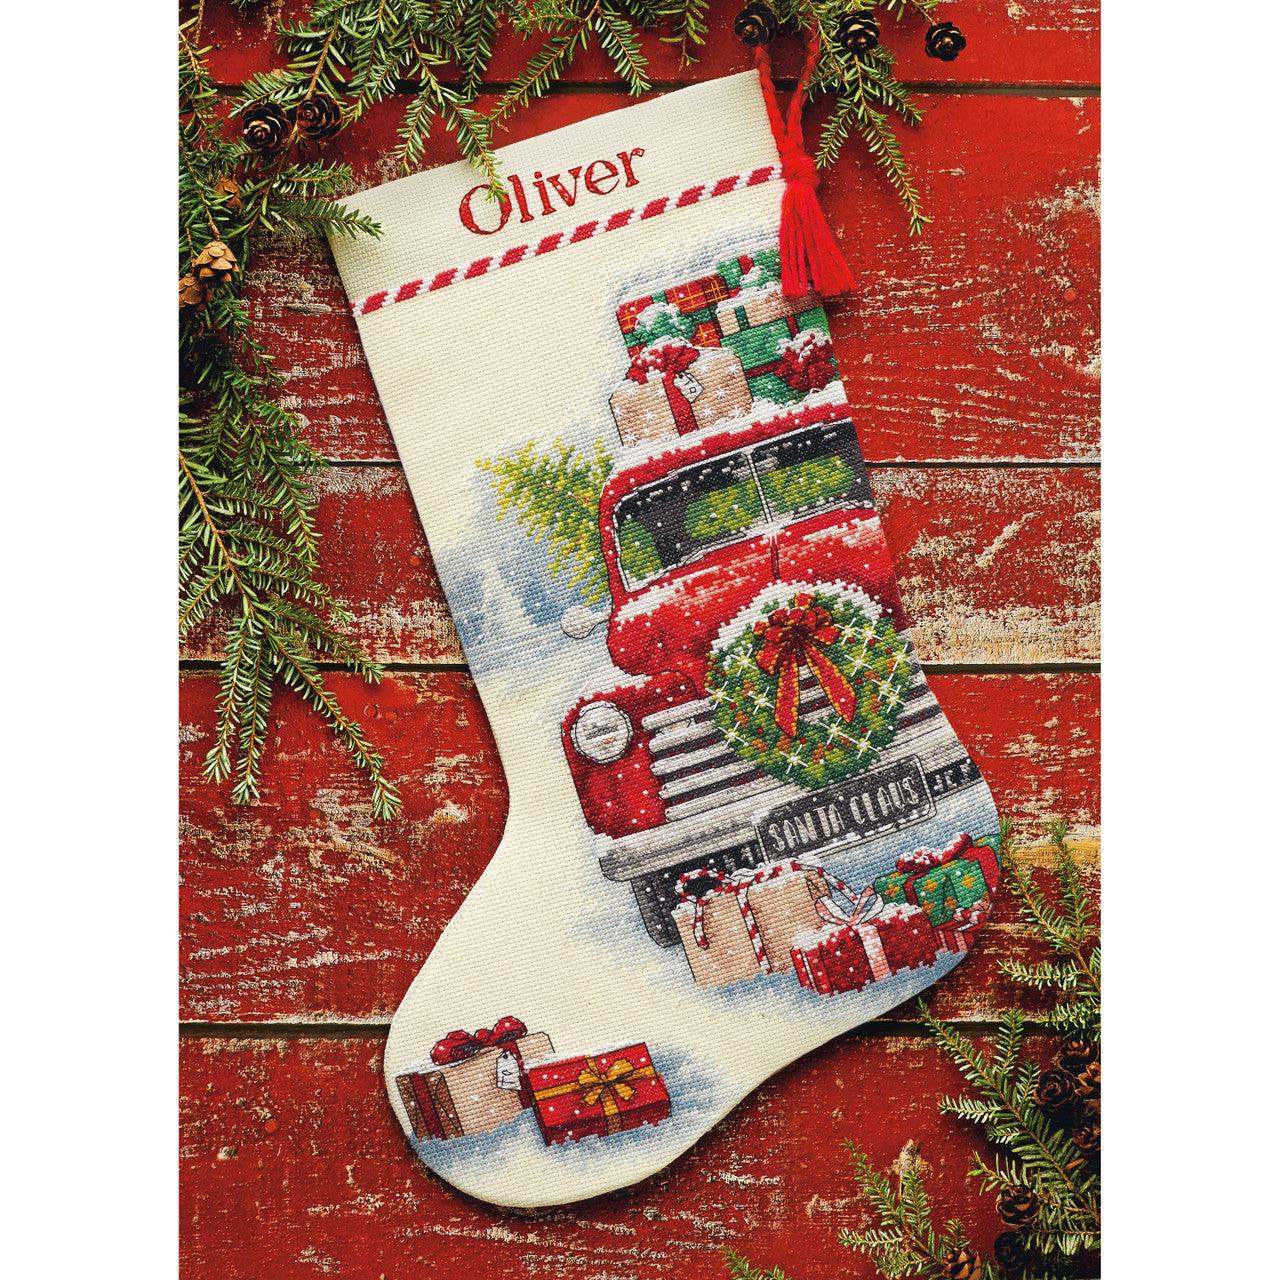 SANTA'S TRUCK STOCKING, Counted Cross Stitch Kit, 14 count ivory Aida, size 16" long, DIMENSIONS (70-08986)